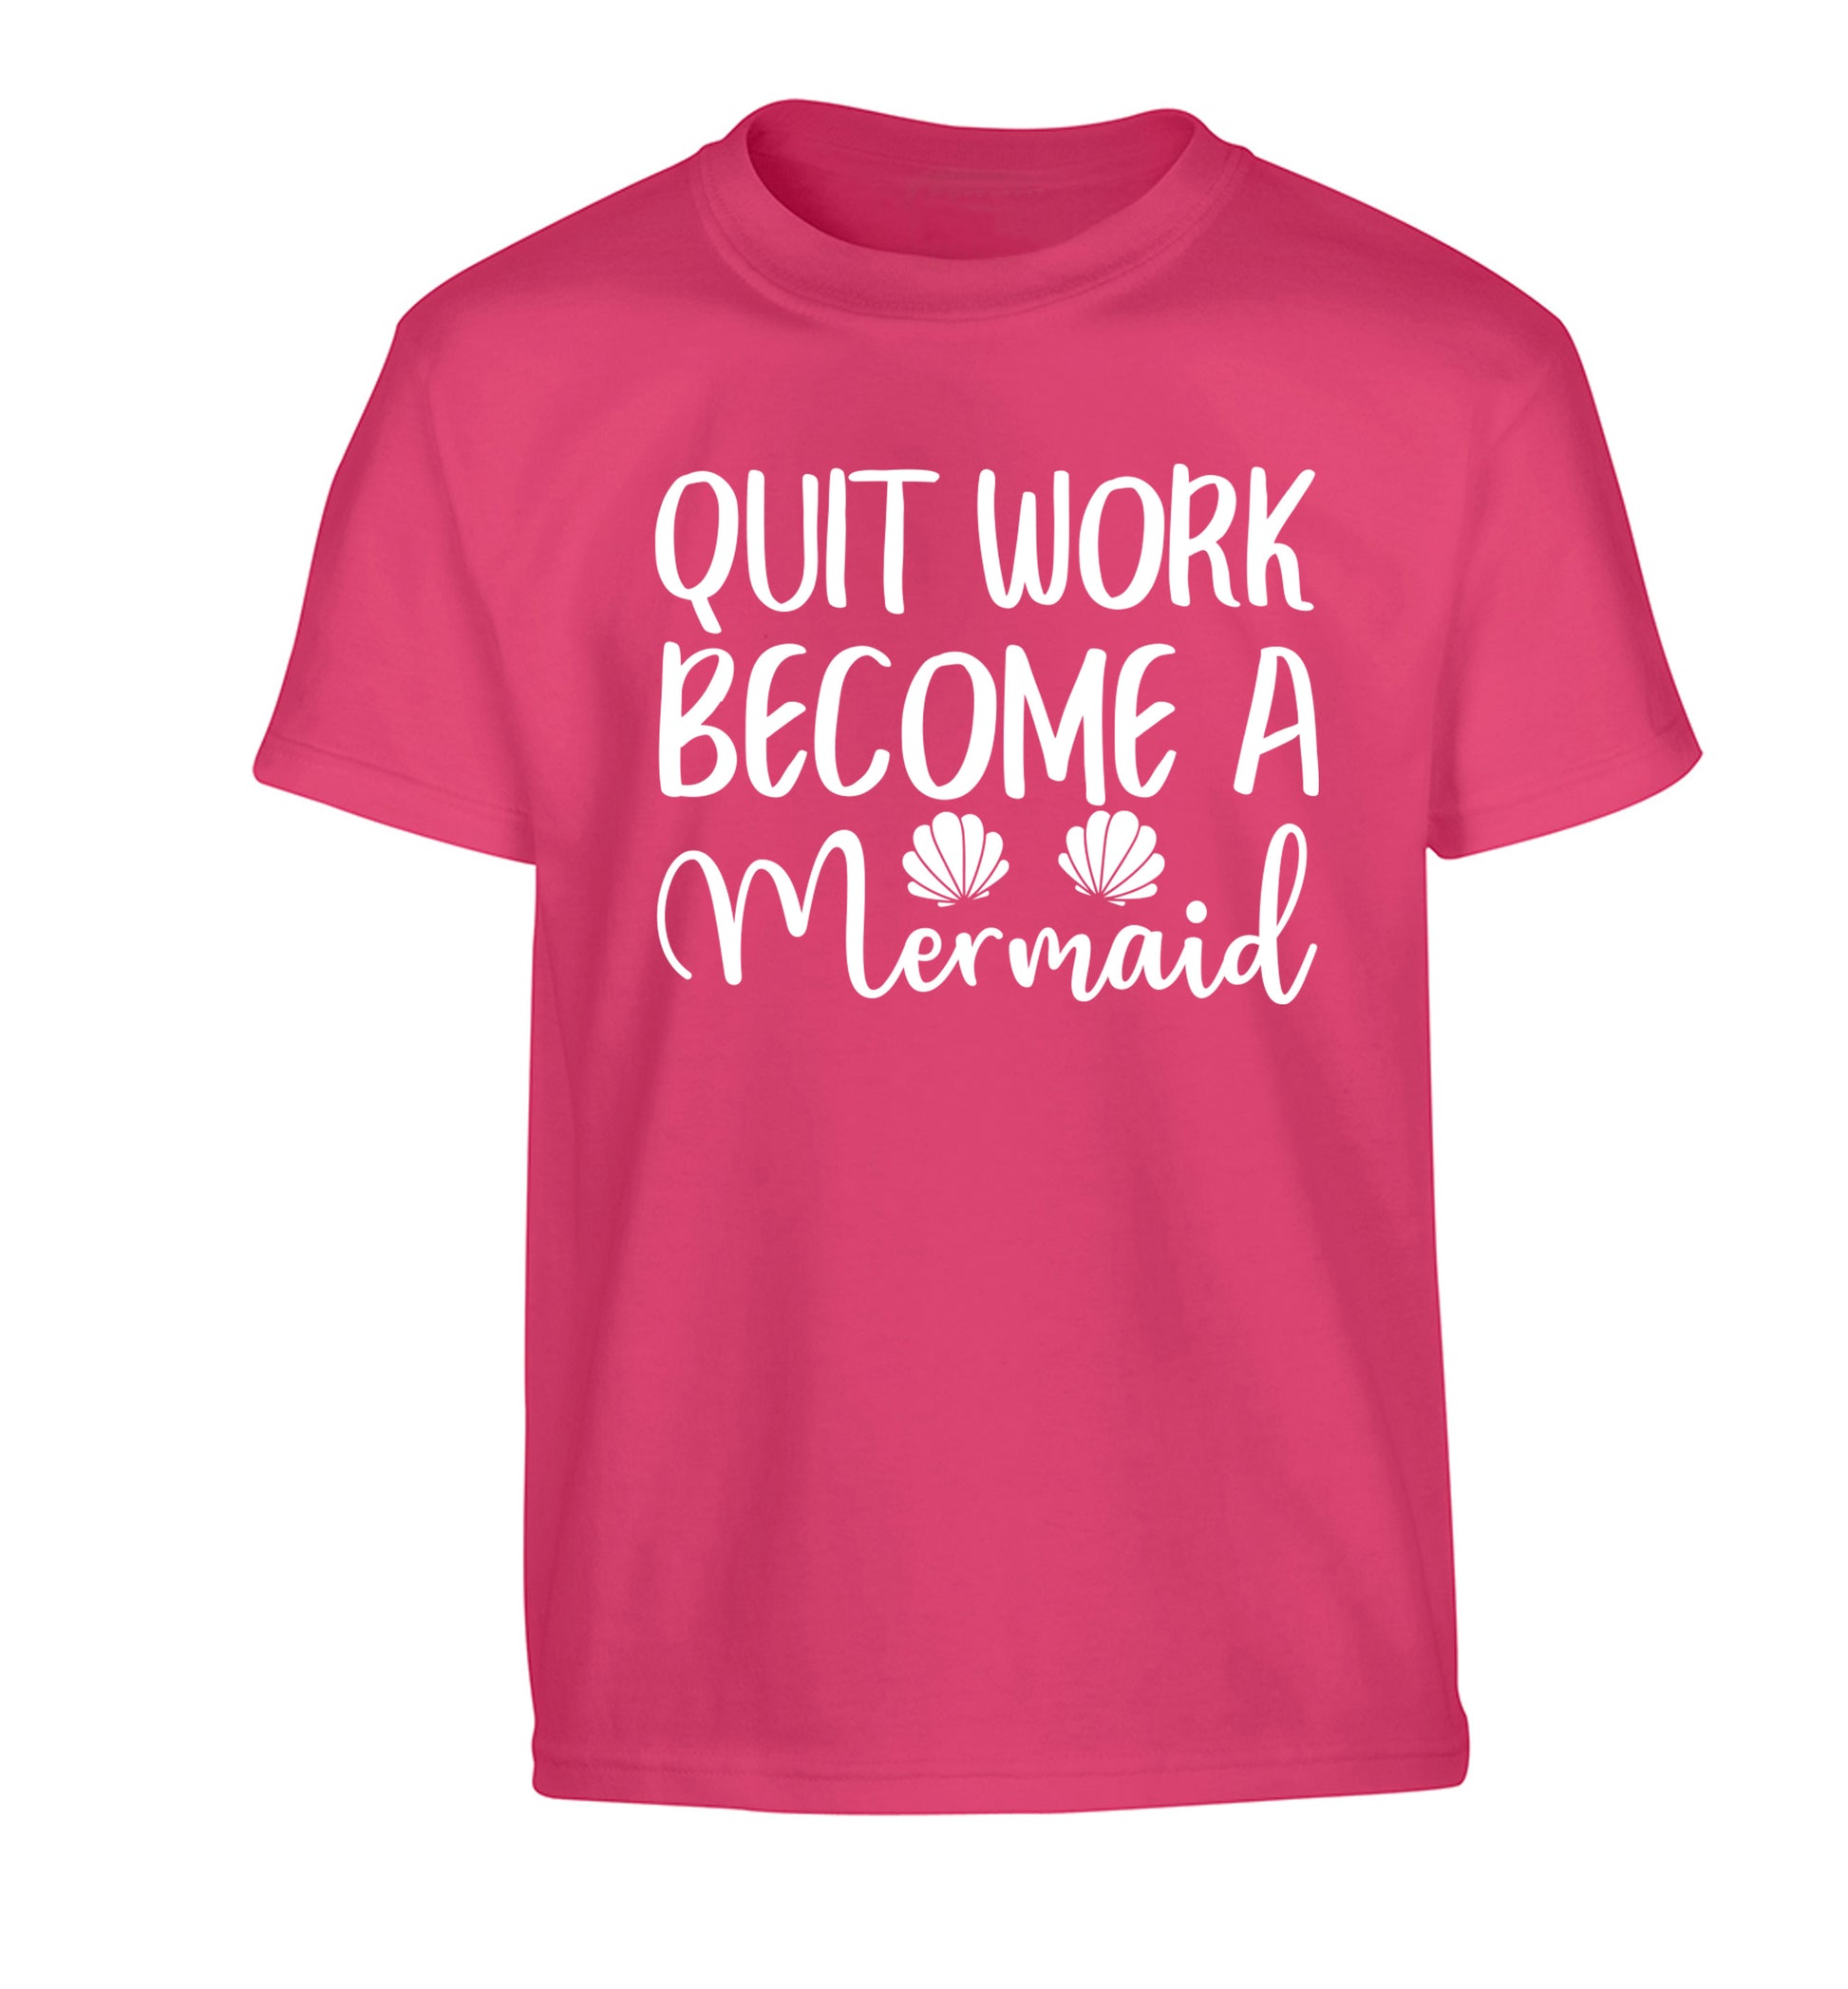 Quit work become a mermaid Children's pink Tshirt 12-13 Years